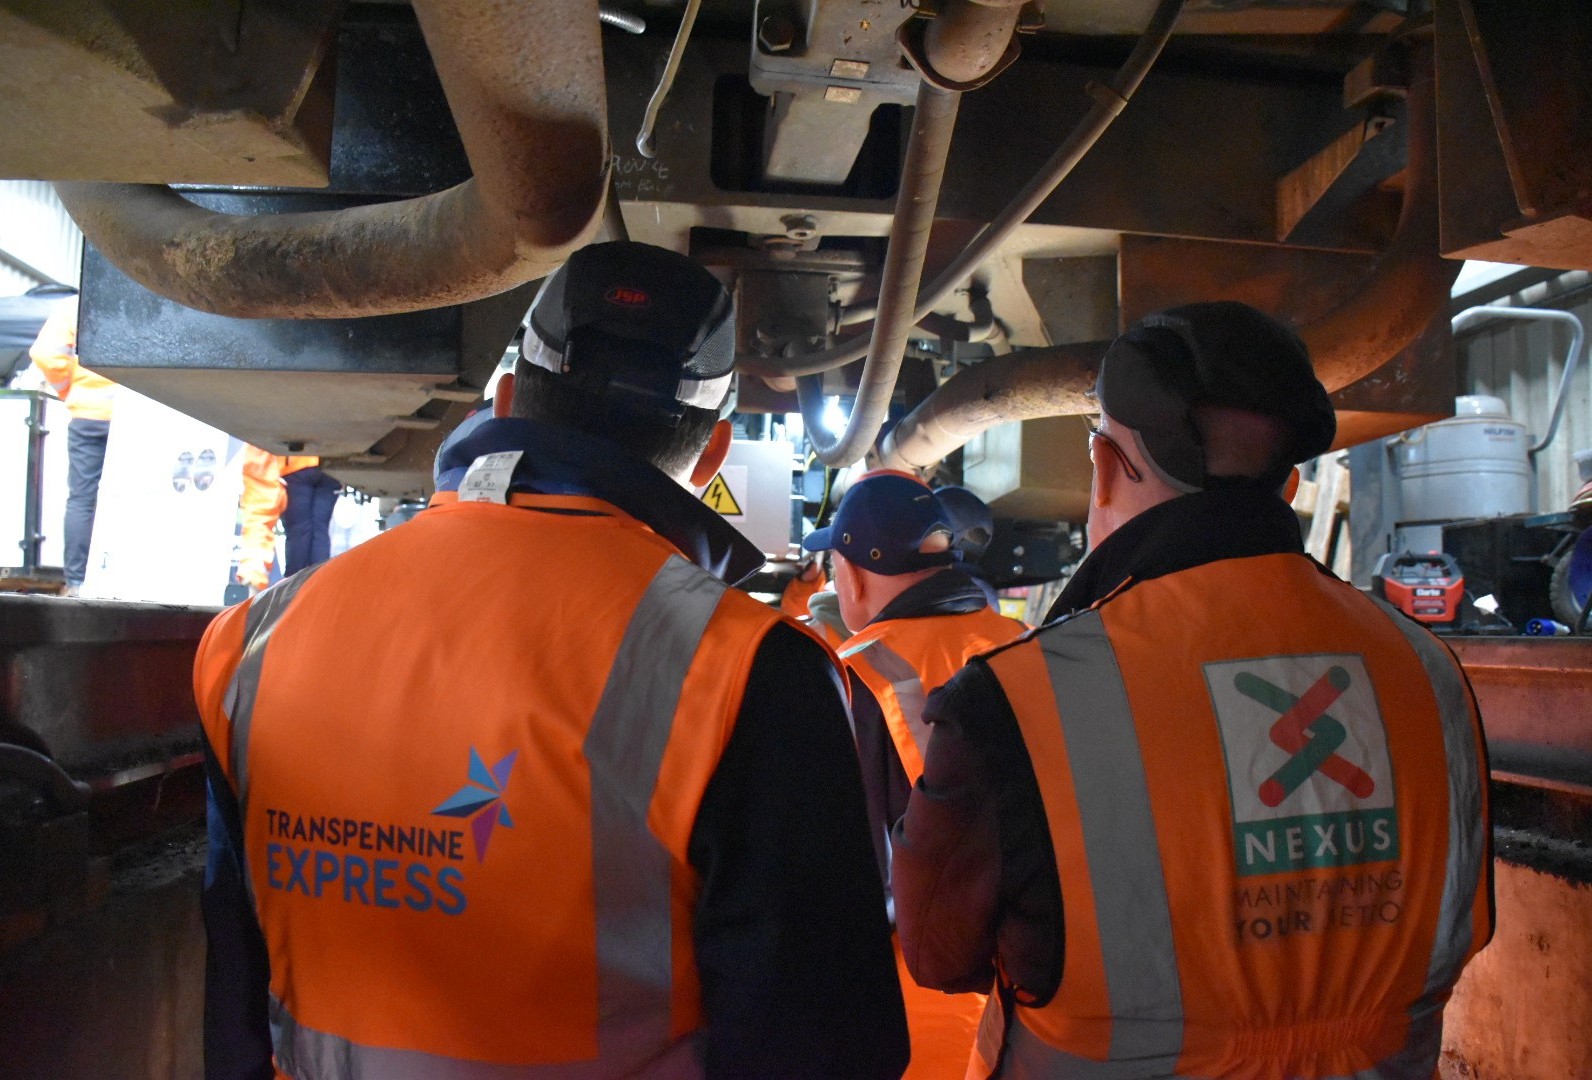 industry-colleagues-looking-underneath-the-train-at-the-new-technolgy